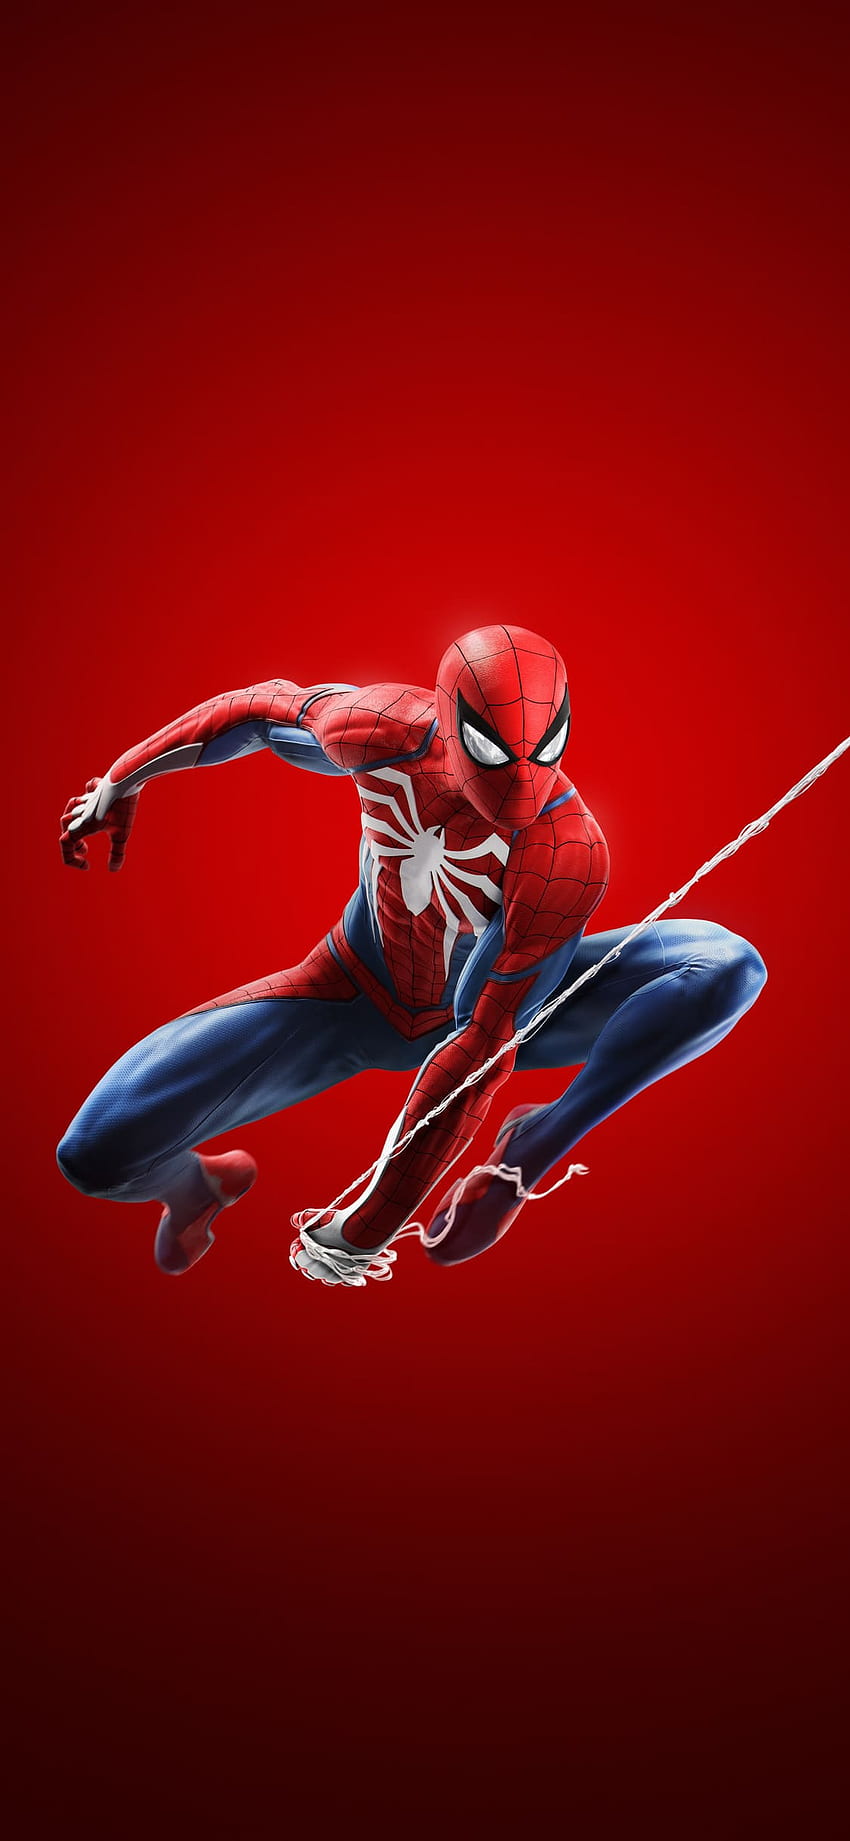 All Mobile New Wallpaper HD Spiderman | New wallpaper hd, Hd wallpapers for  mobile, Marvel wallpaper